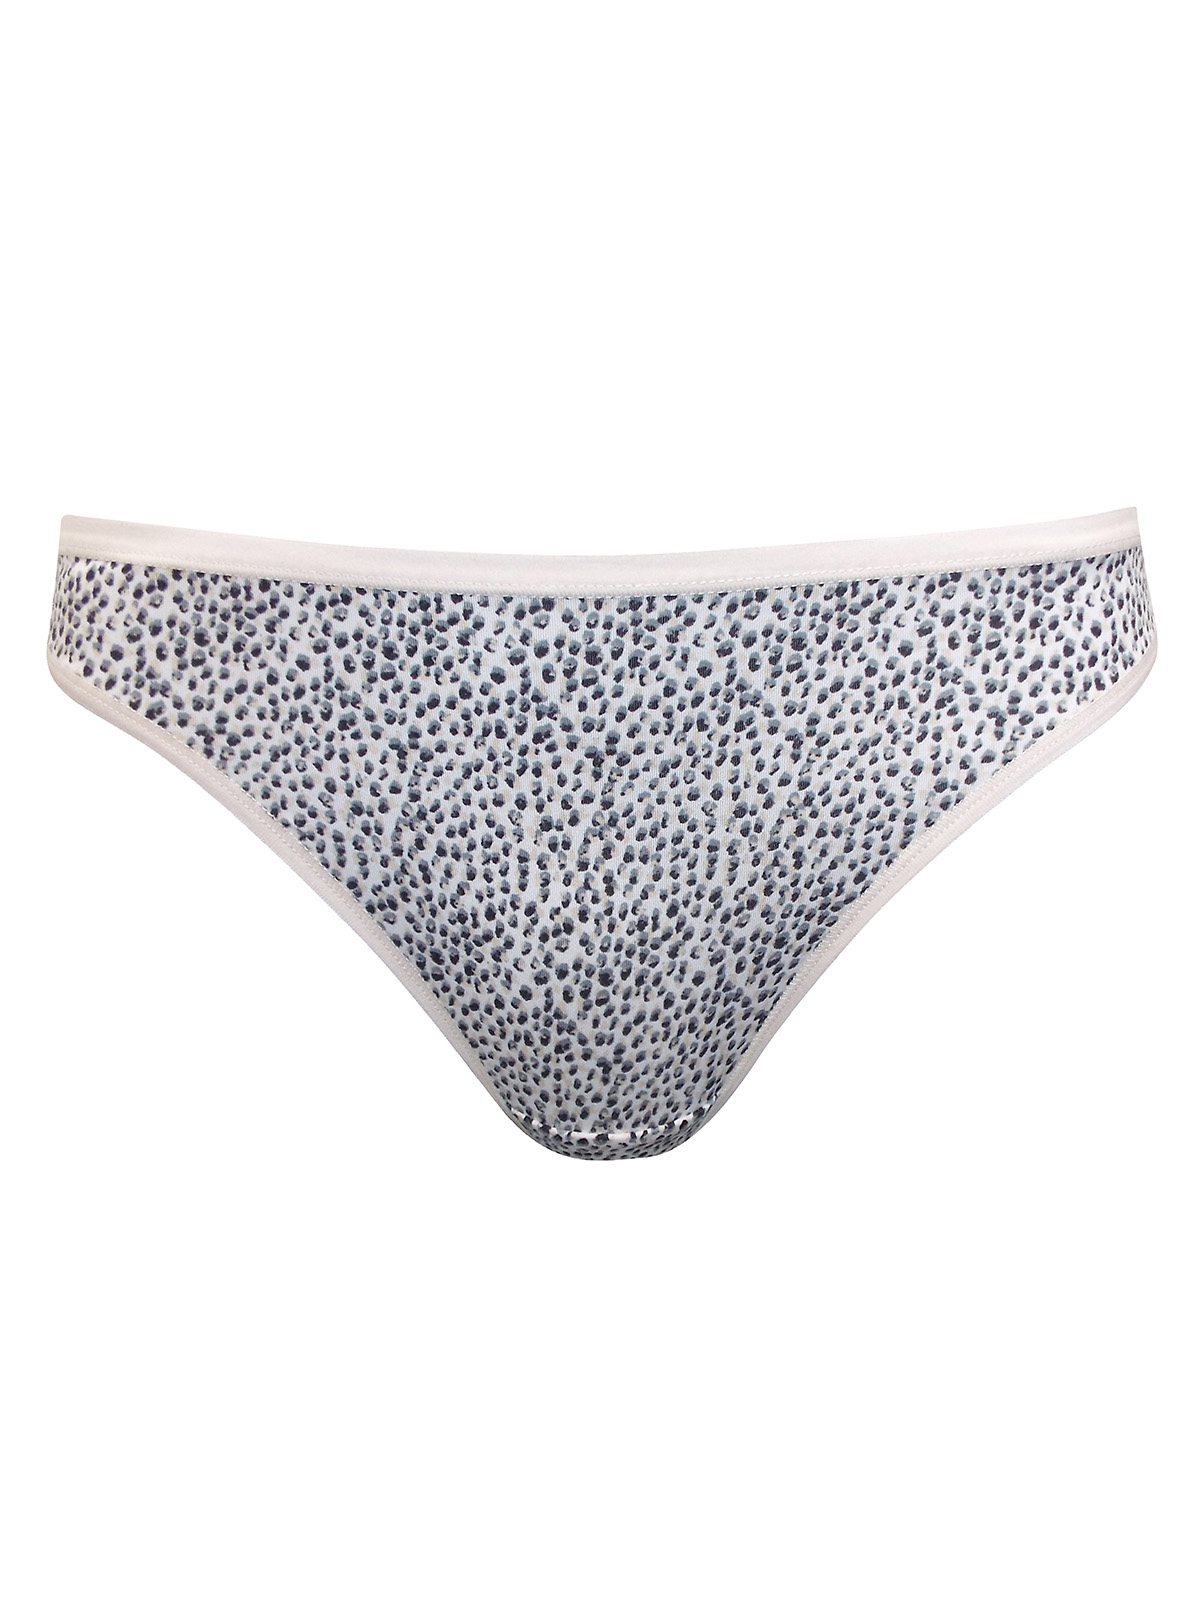 F&F - - F&F ALMOND Printed No VPL Low Rise Thong - Size 10 to 18